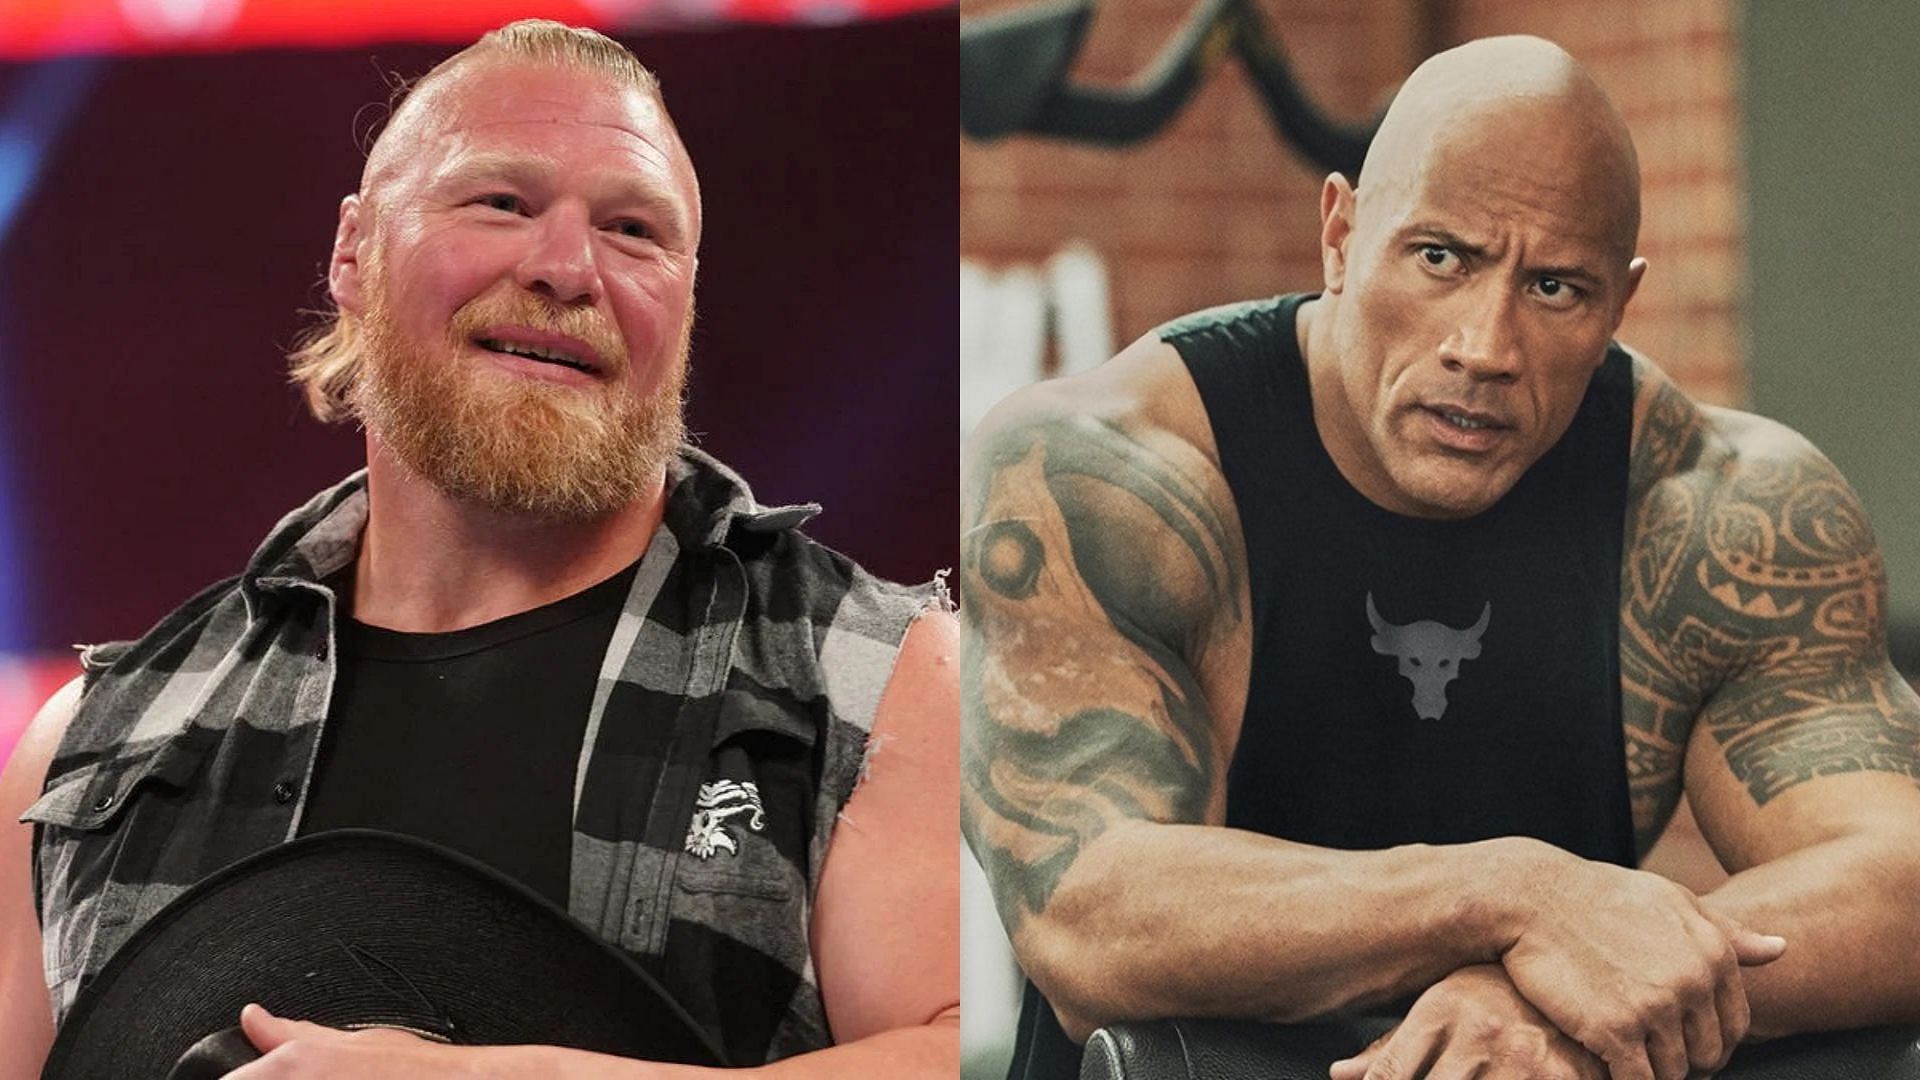 Brock Lesnar and The Rock are among WWE